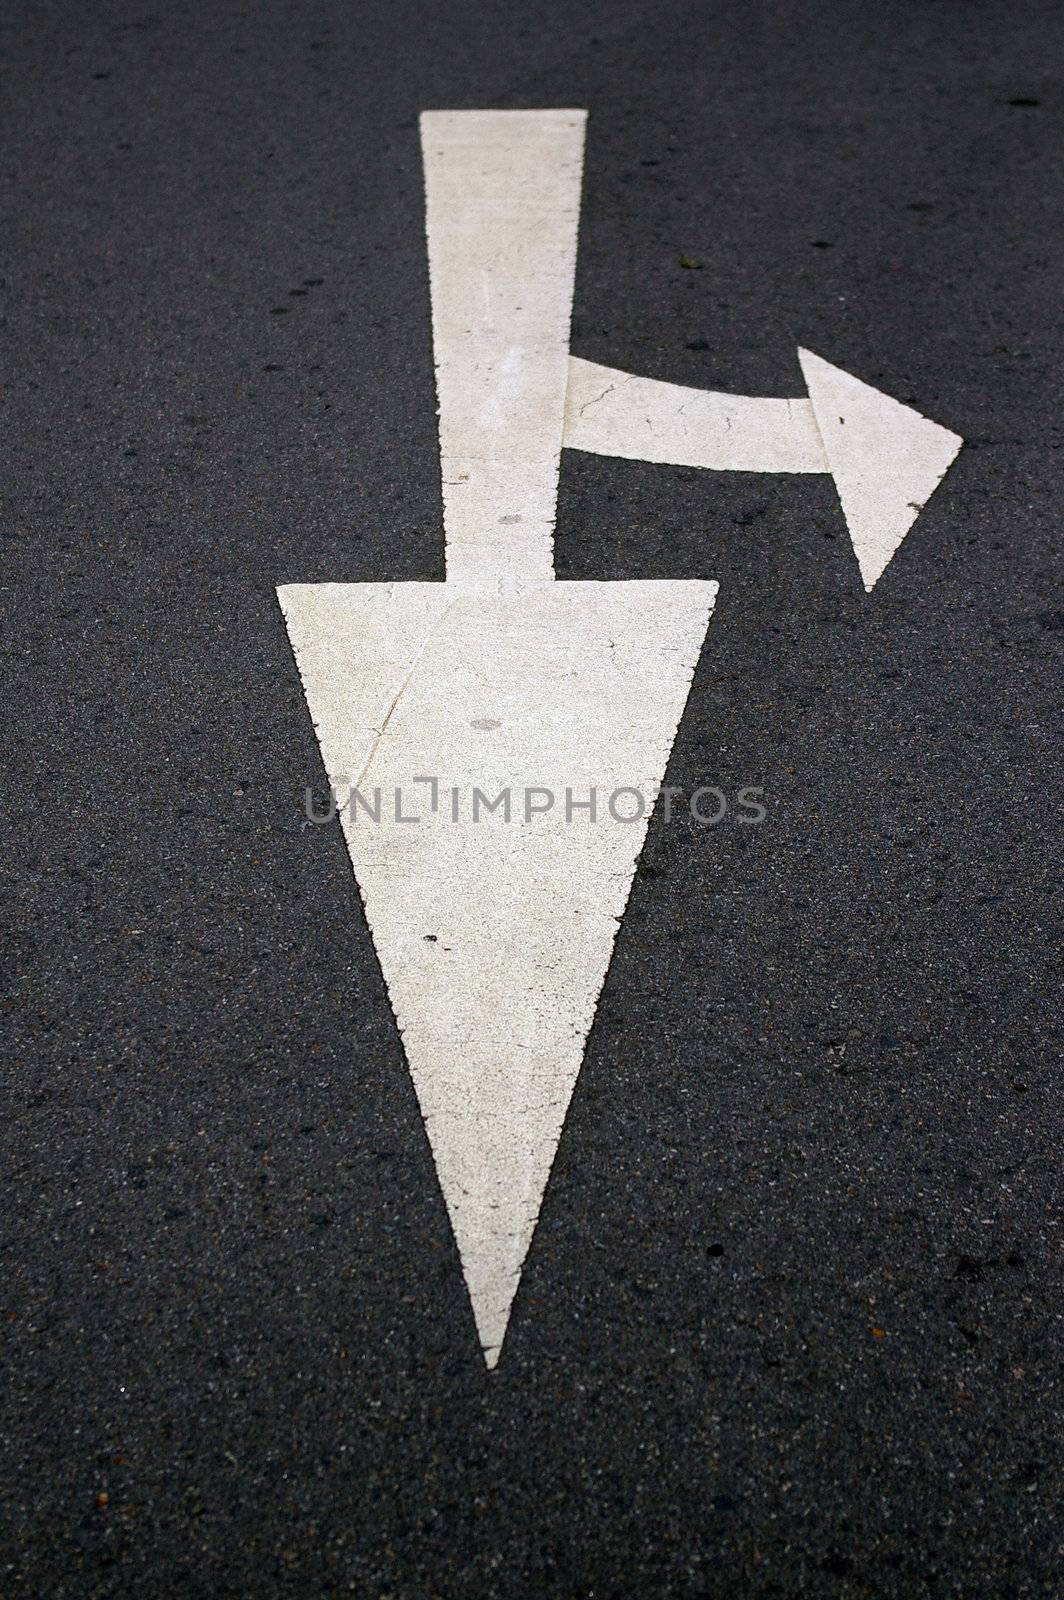 Moving forward and turn left sign by kawing921